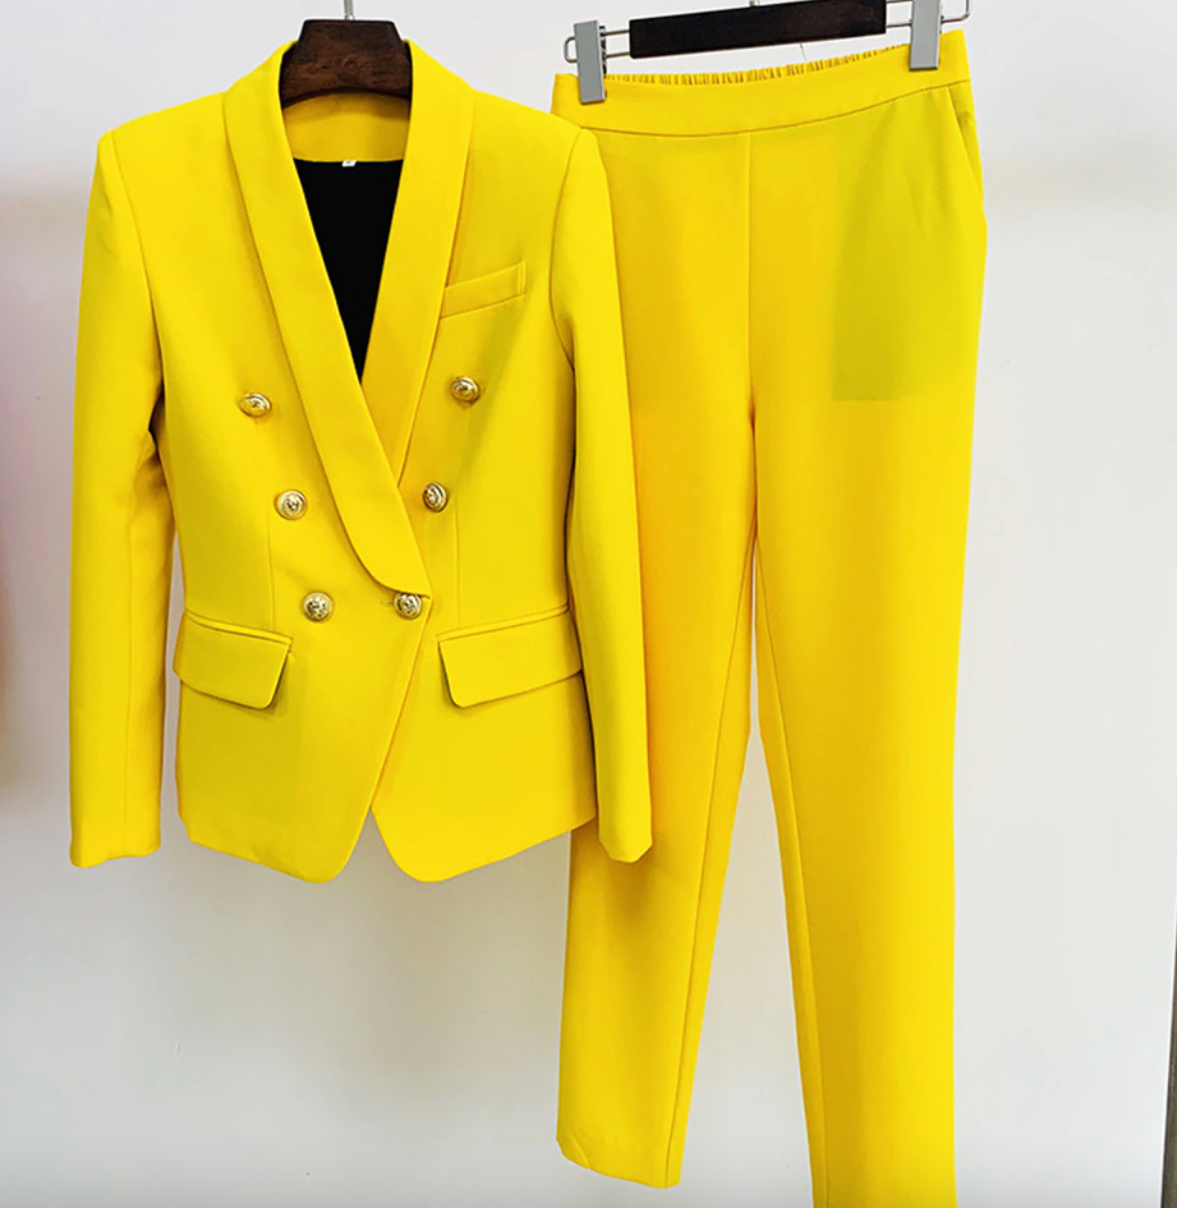 Selected Femme blazer and pants set in yellow  ASOS